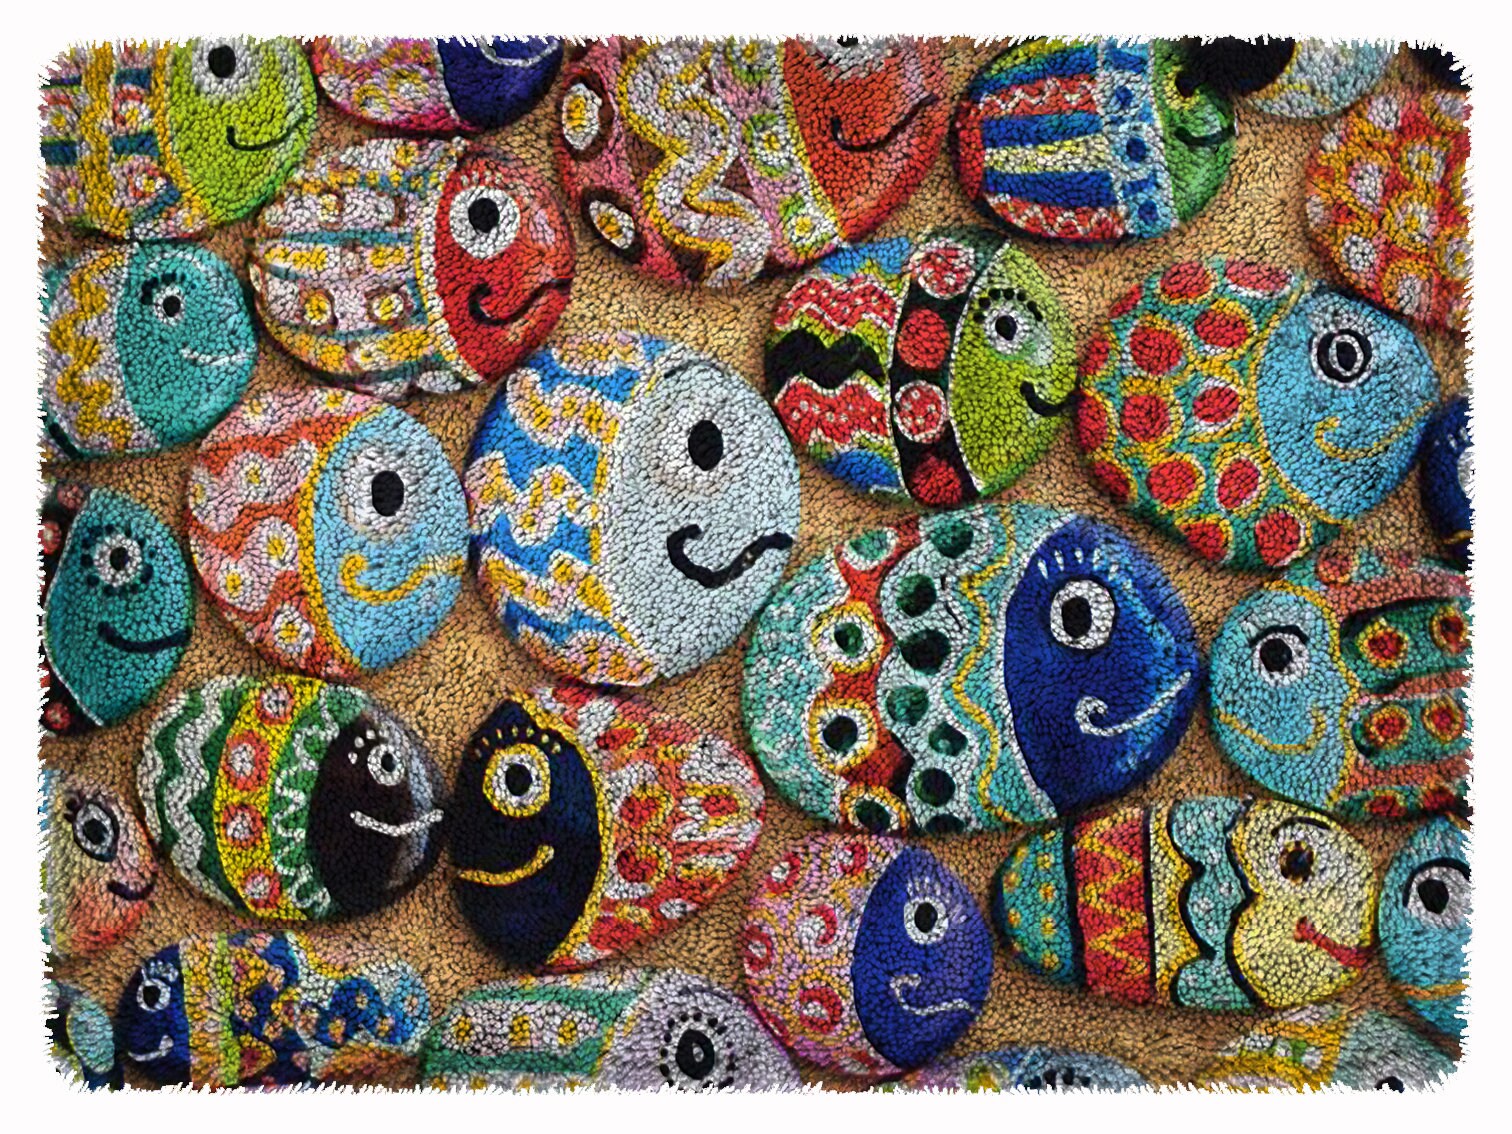  Fishing Fish Latch Hook Rug Kits with Printed Patterns